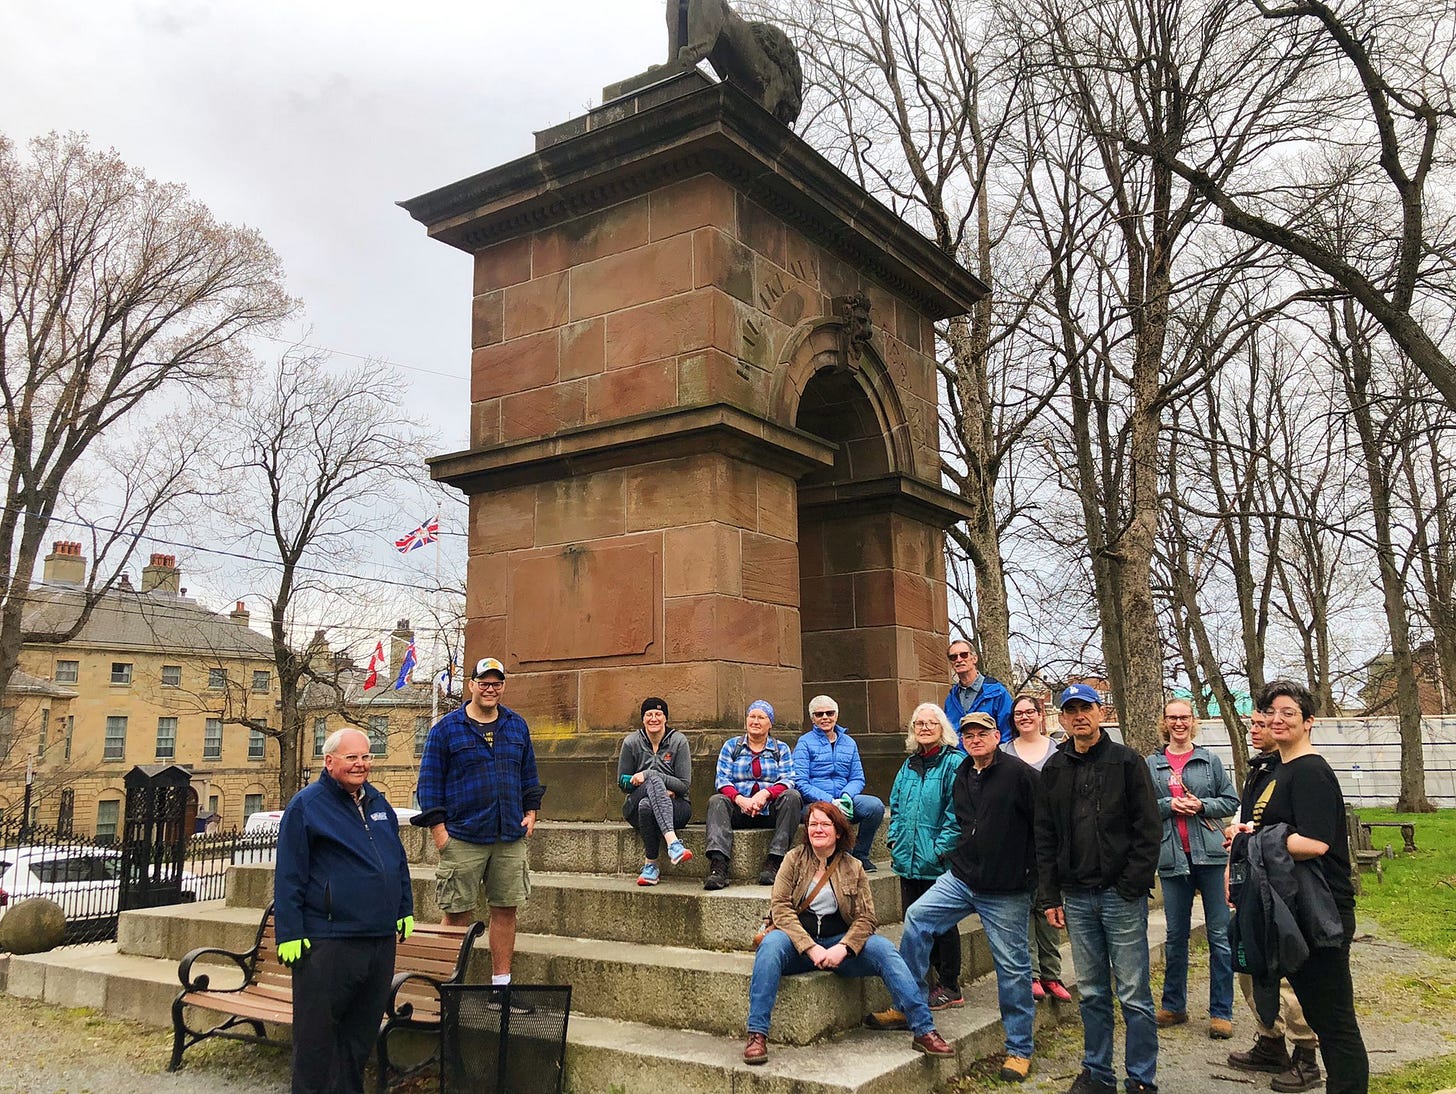 Volunteers gather at the Old Burying Ground cemetery in Halifax. April 2023. Photo credit: Nancy Forde